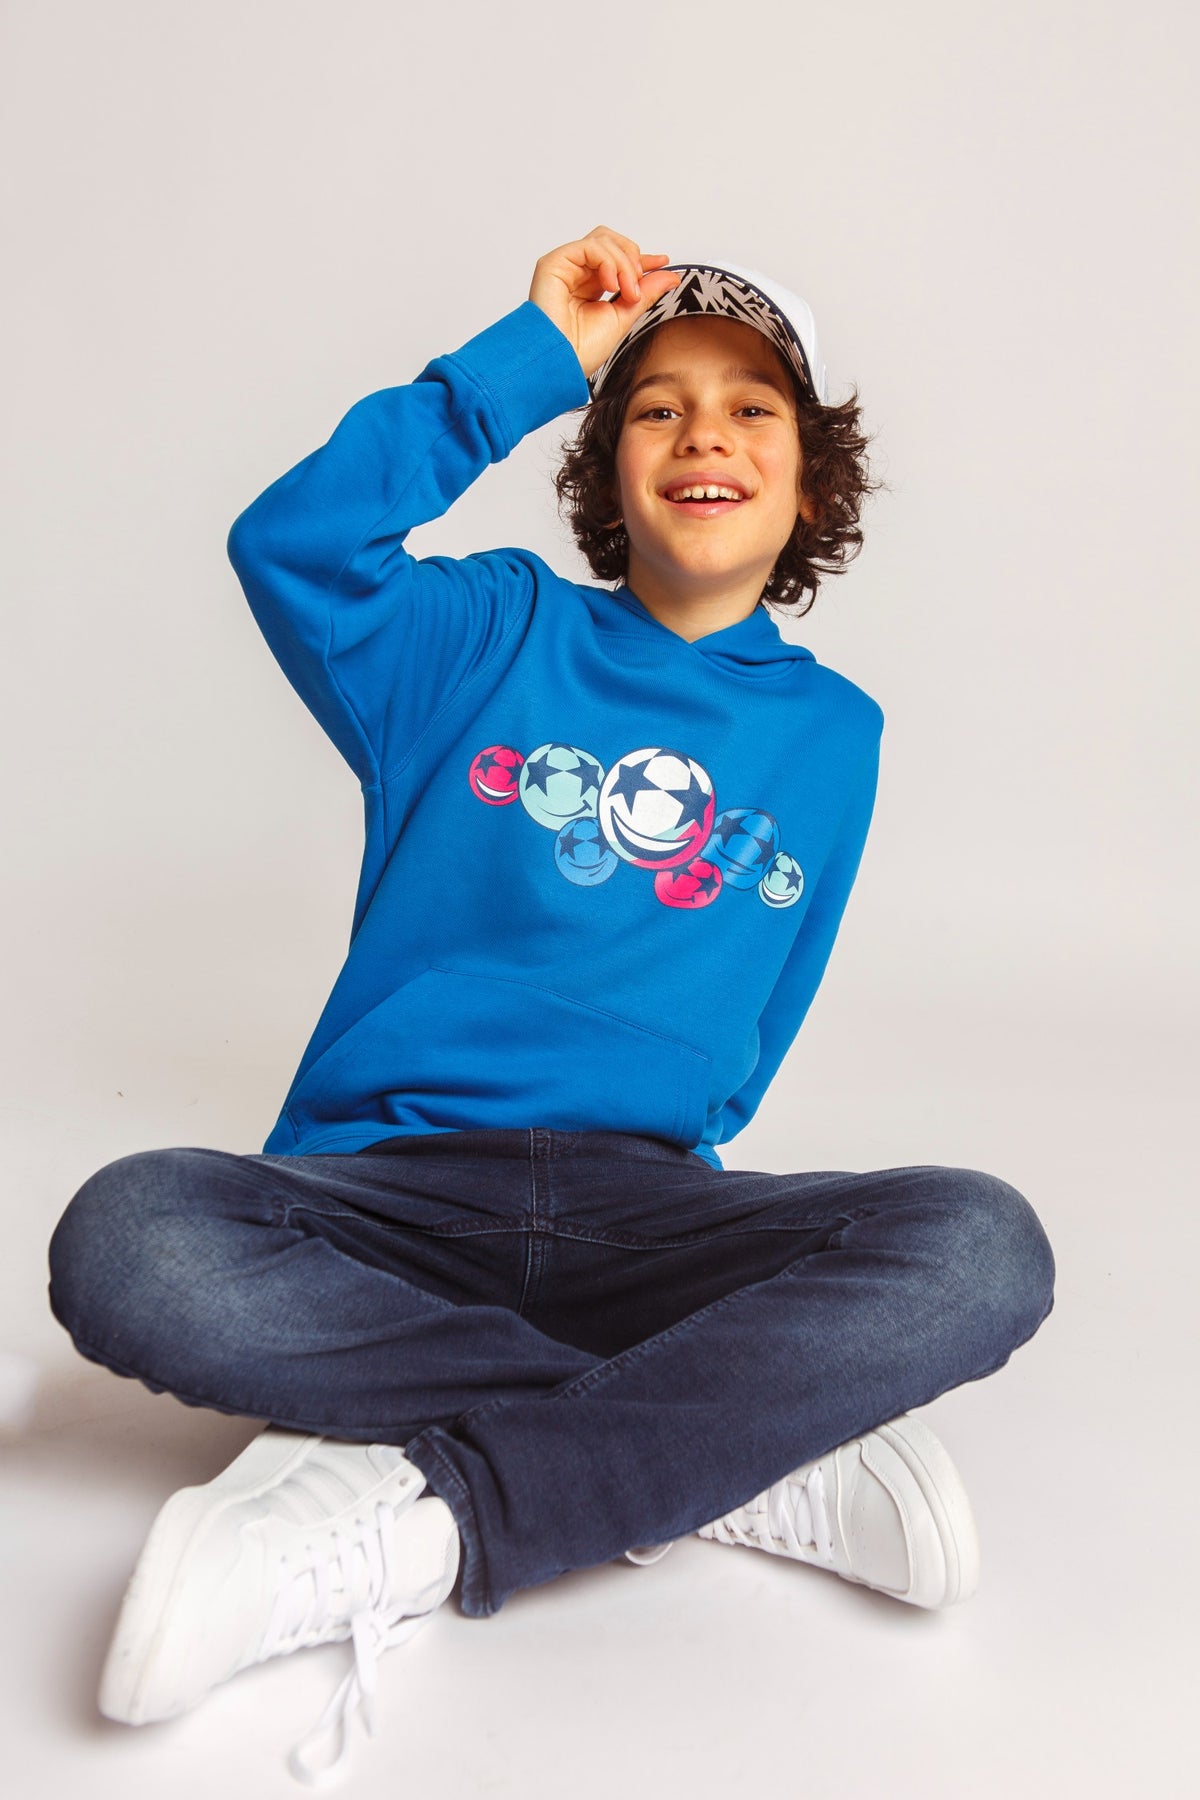 UCL Smiling Starball Kids Holdie - Royal Blue